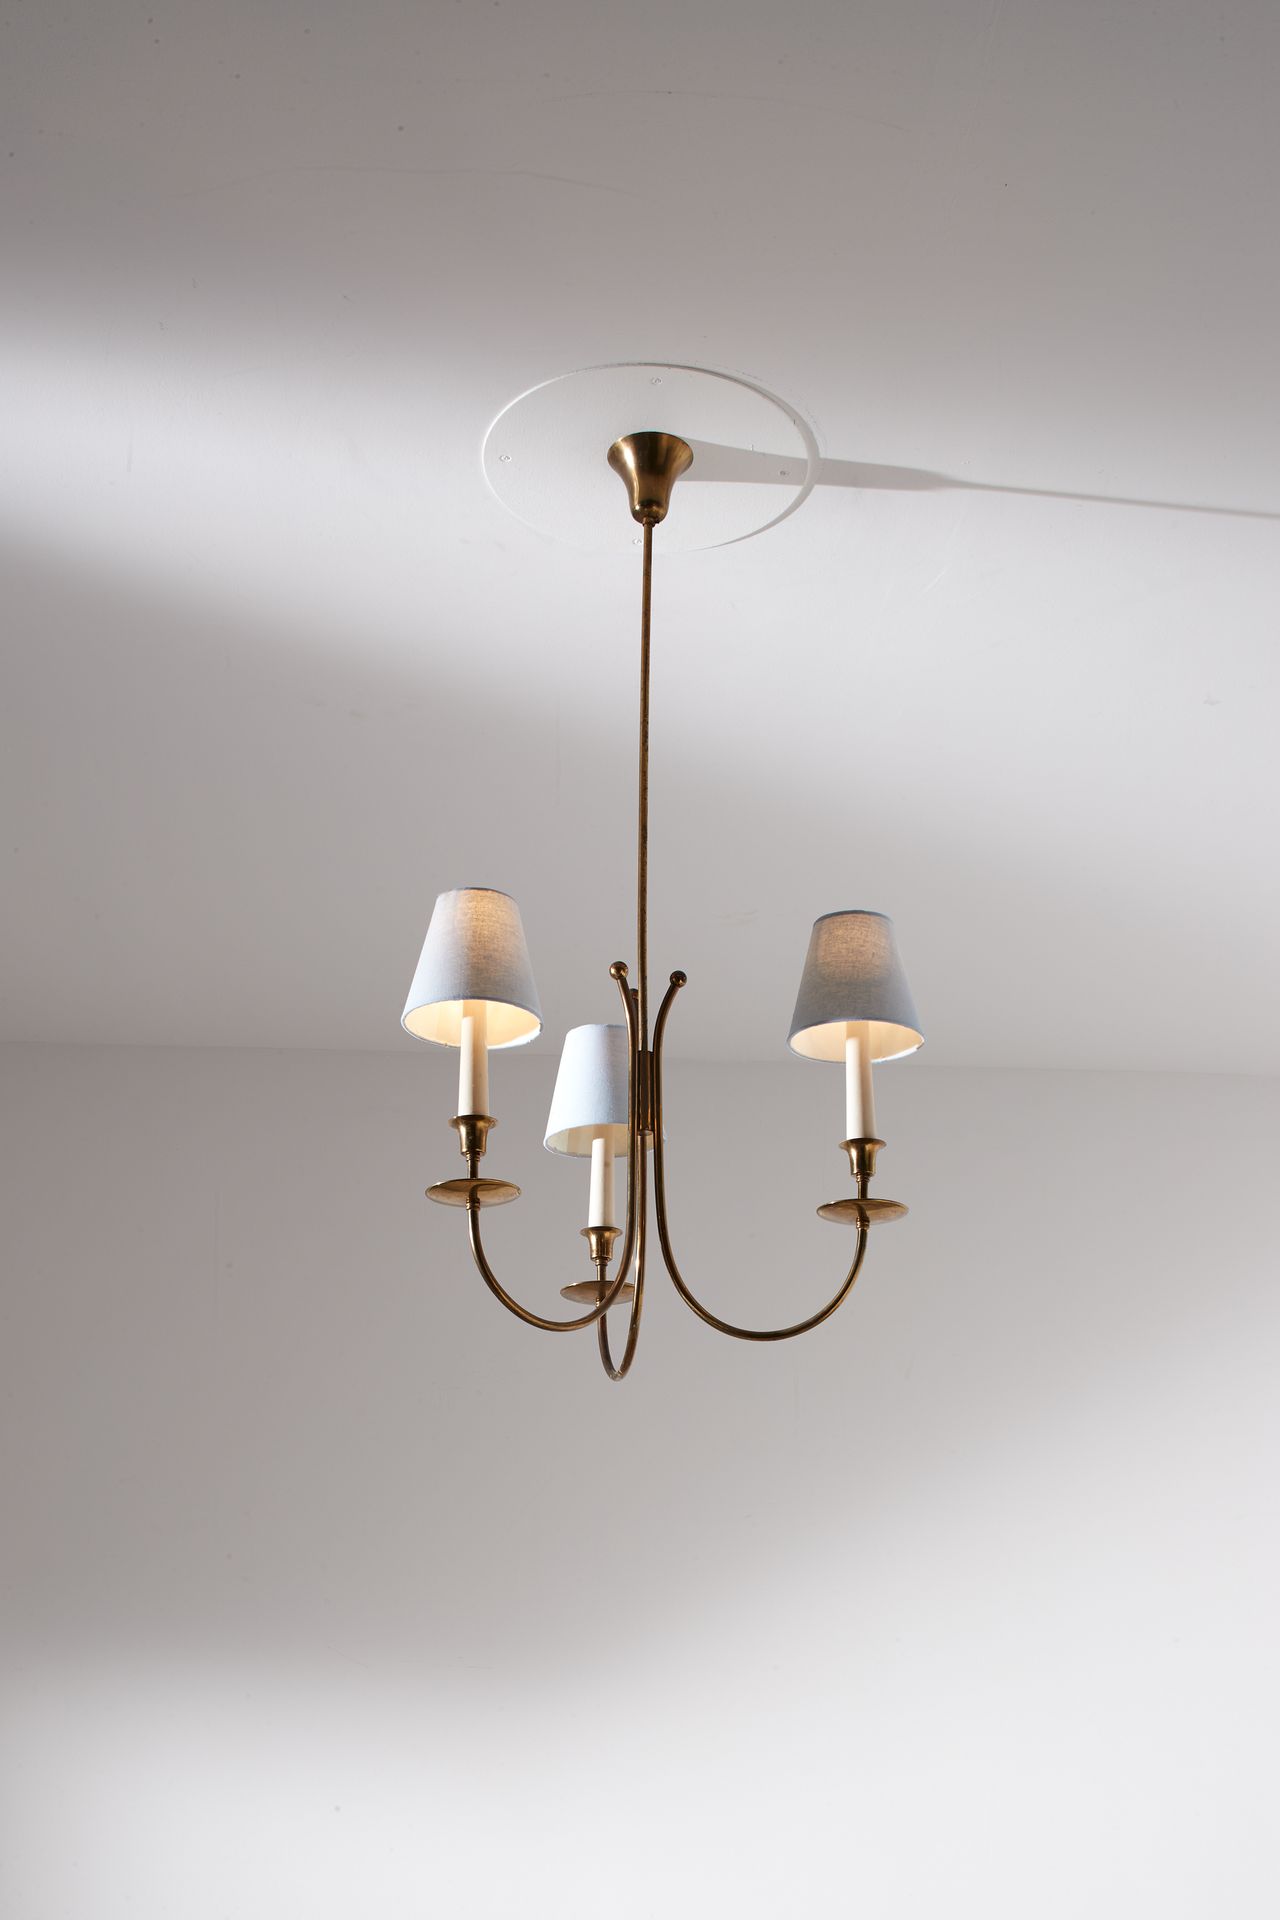 JEAN ROYERE (NEL GUSTO DI) Pendant lamp. Brass, lacquered wood, fabric. Italy 19&hellip;